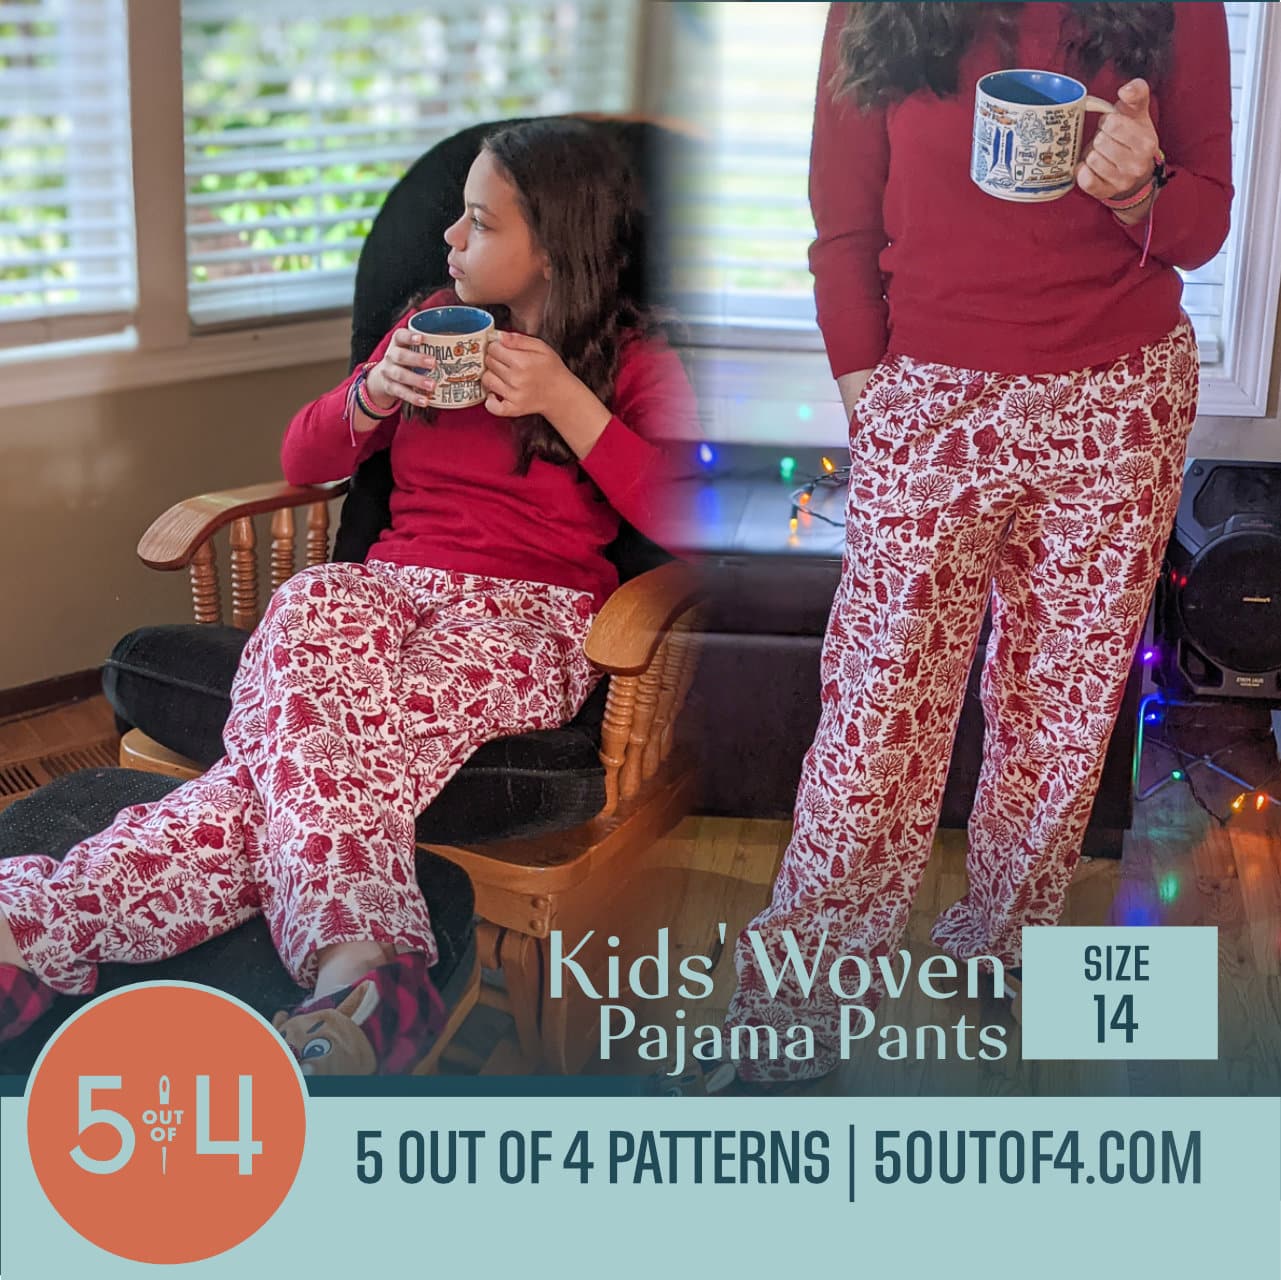 Kids' Woven Pajama Pants - 5 out of 4 Patterns